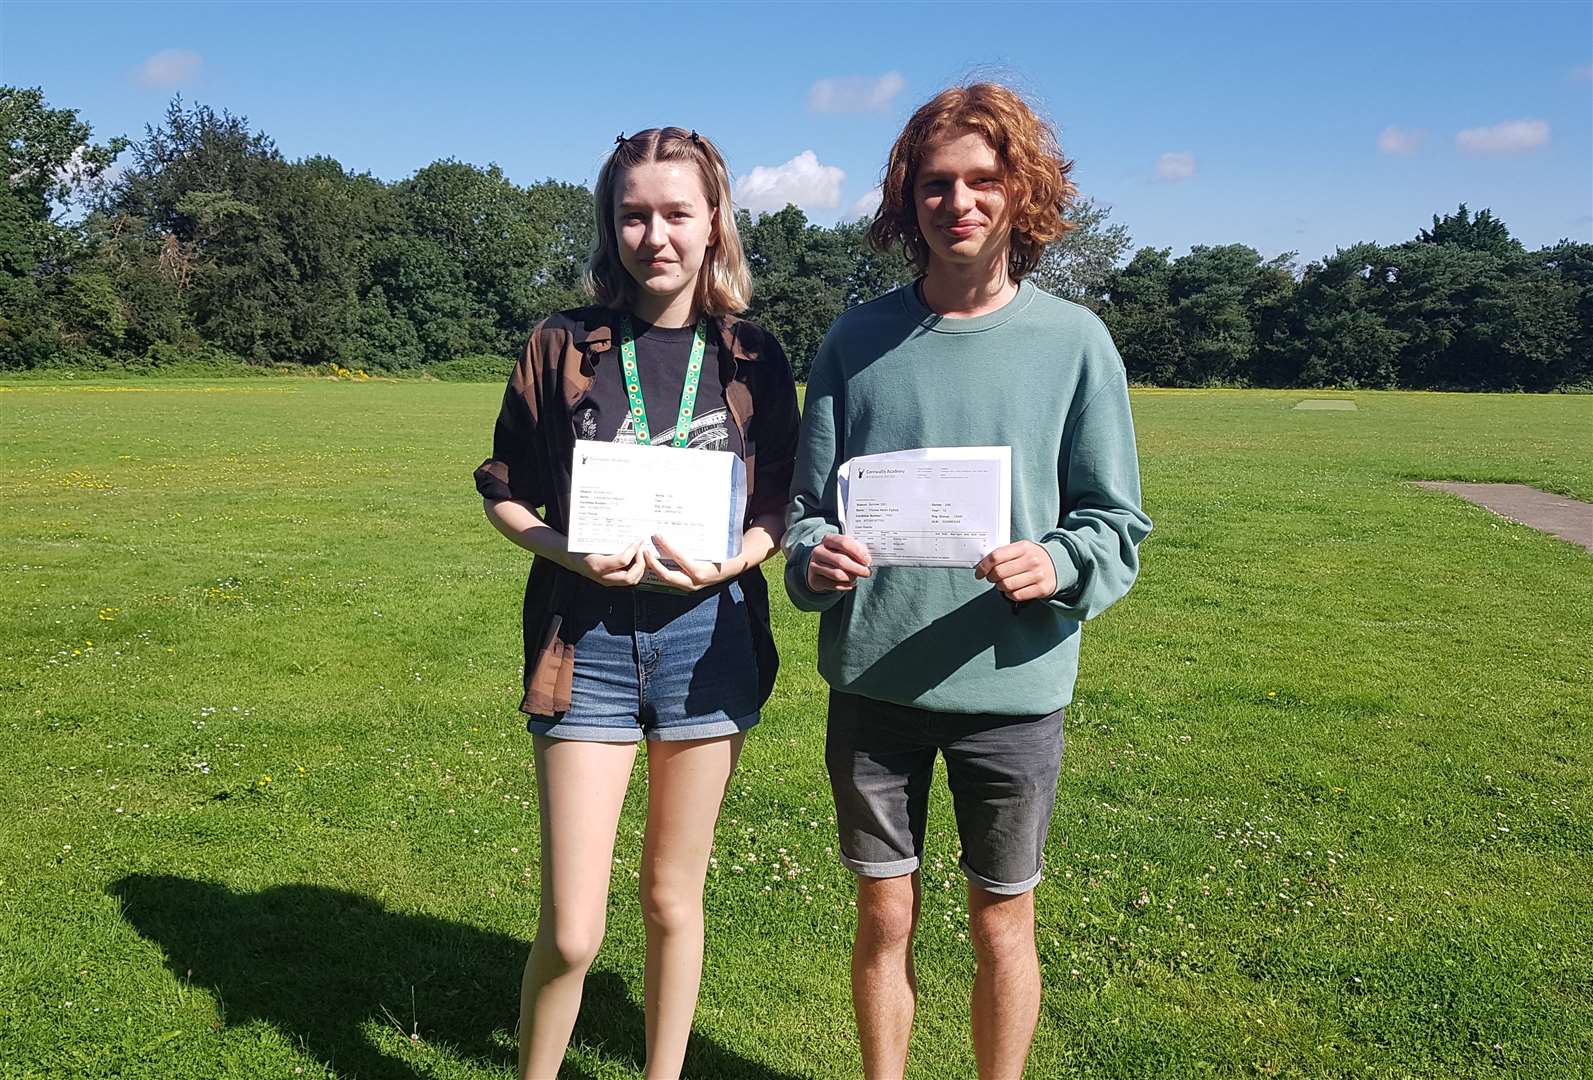 Thomas Elphick and Charlotte Mangold from Cornwallis Academy. Thomas got an A* in sociology, A in biology and A in geography and Charlotte got a Distinction in applied science, B in sociology and a C in English Literature